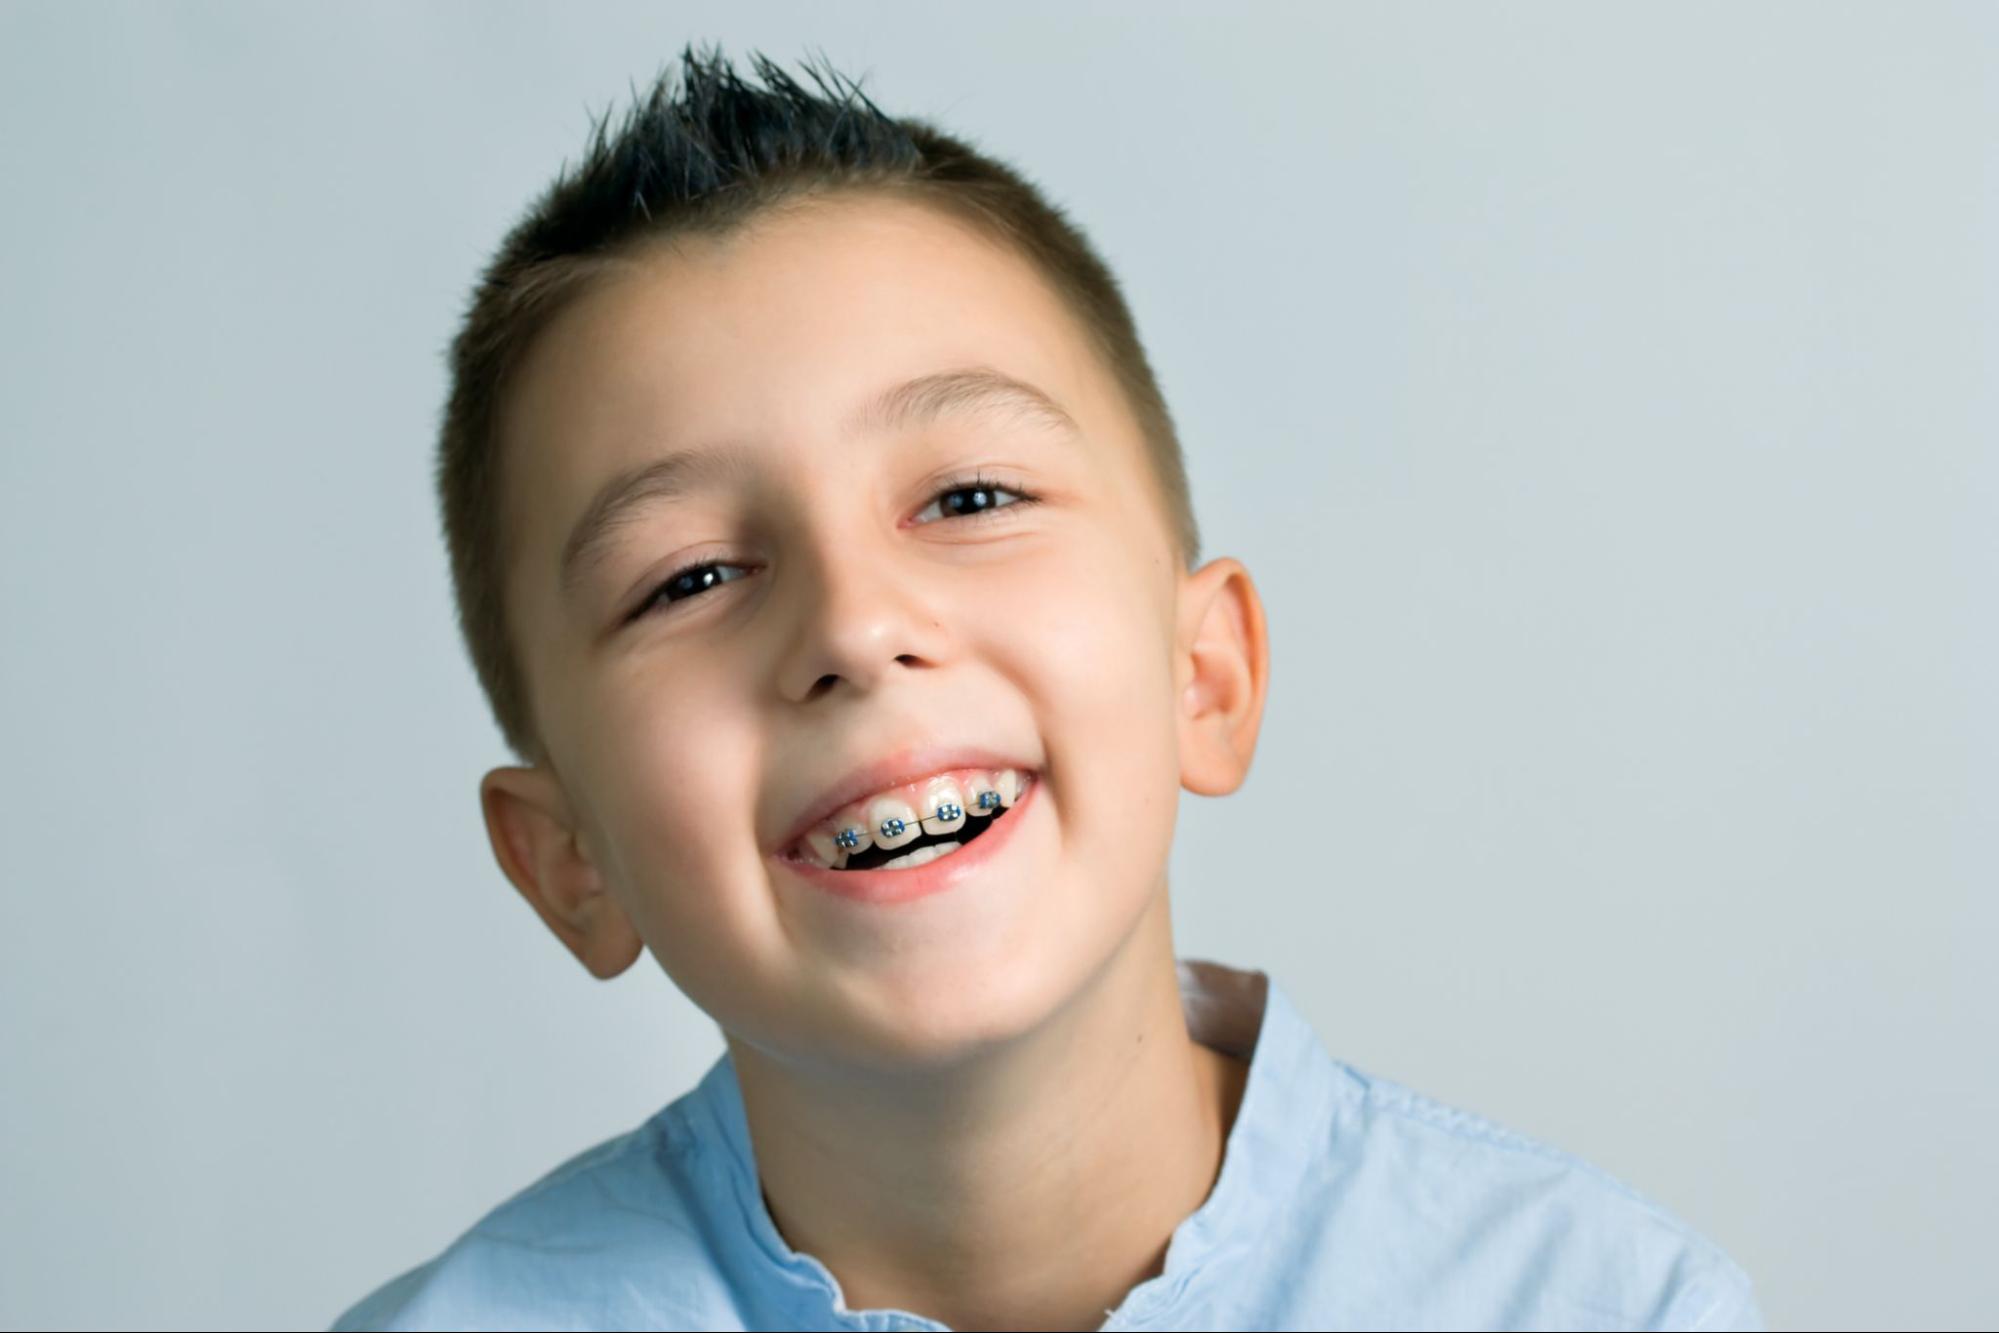 What To Expect from Your First Orthodontic Visit